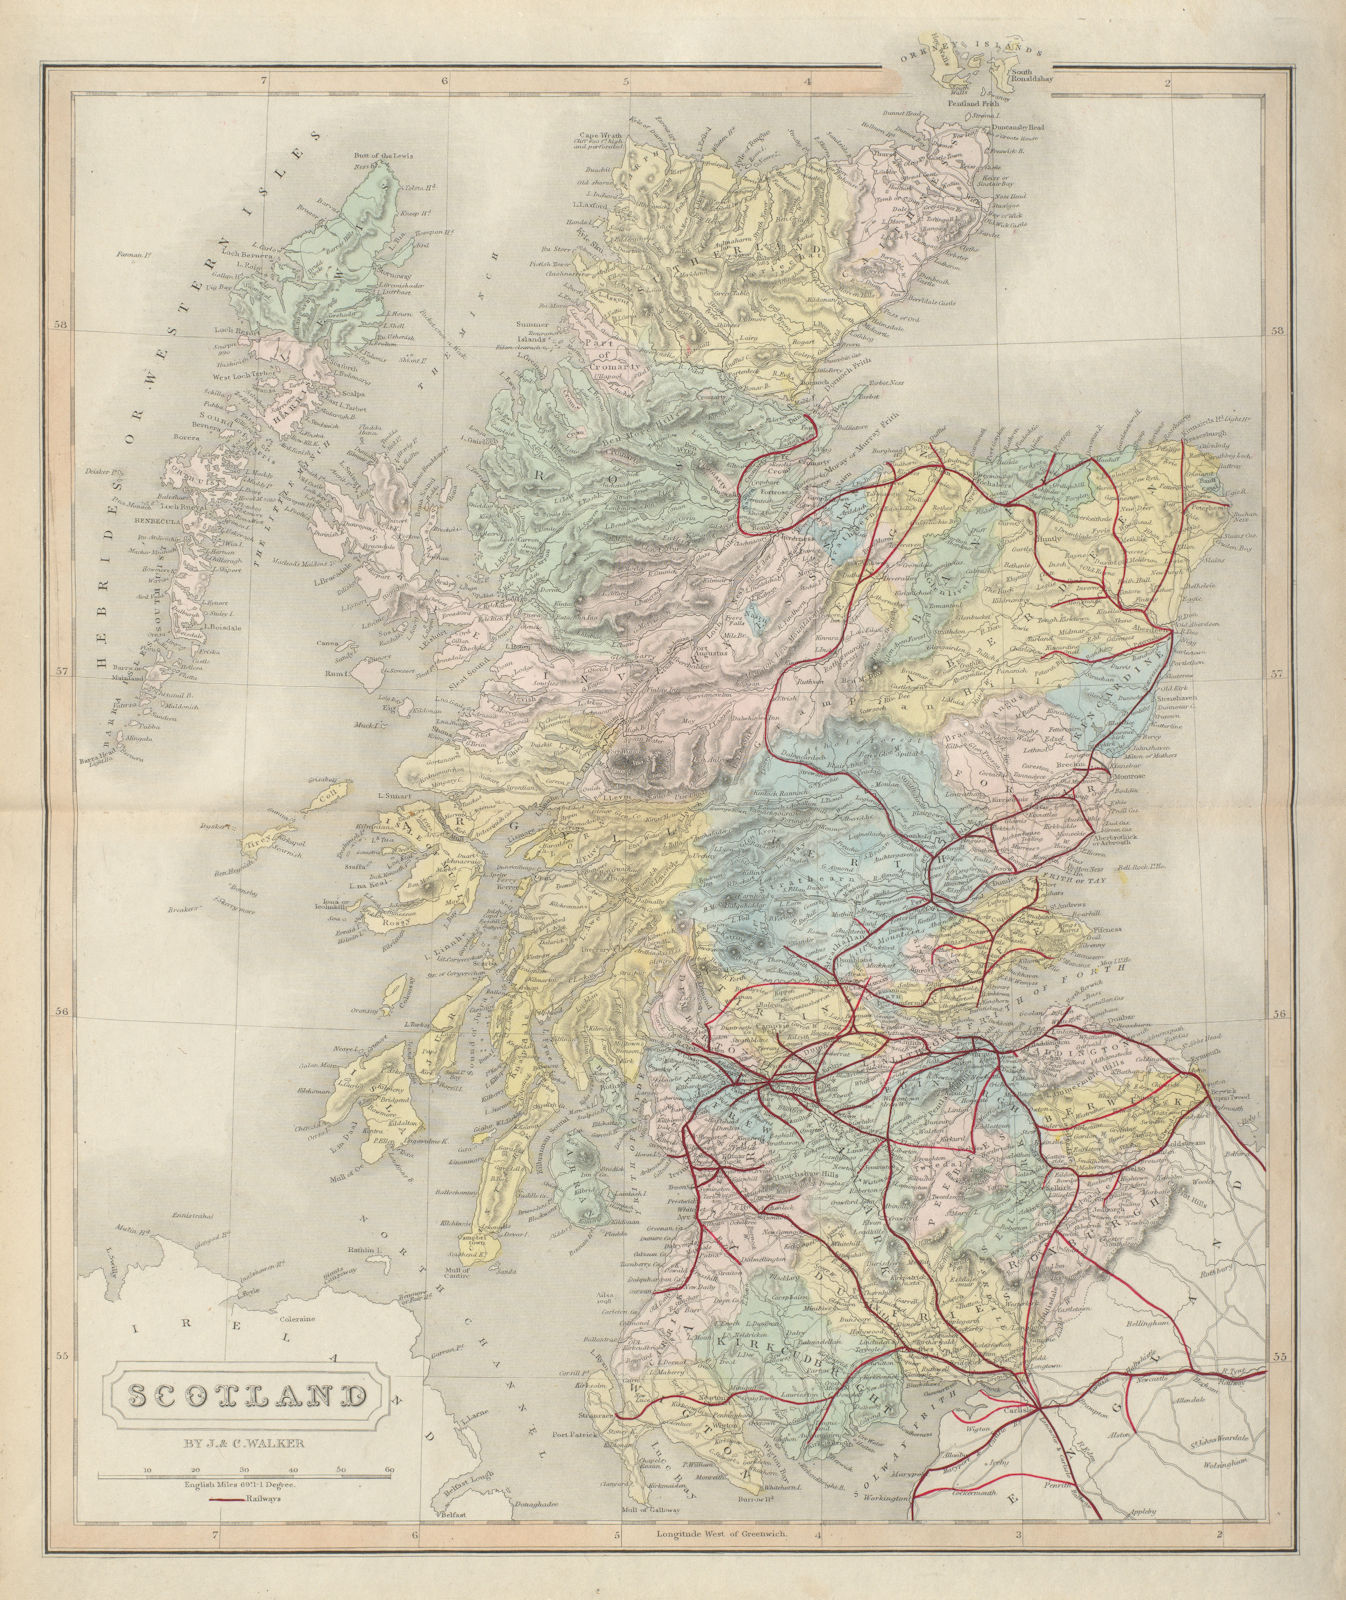 Associate Product Scotland antique map by J & C Walker. Railways & counties 1868 old